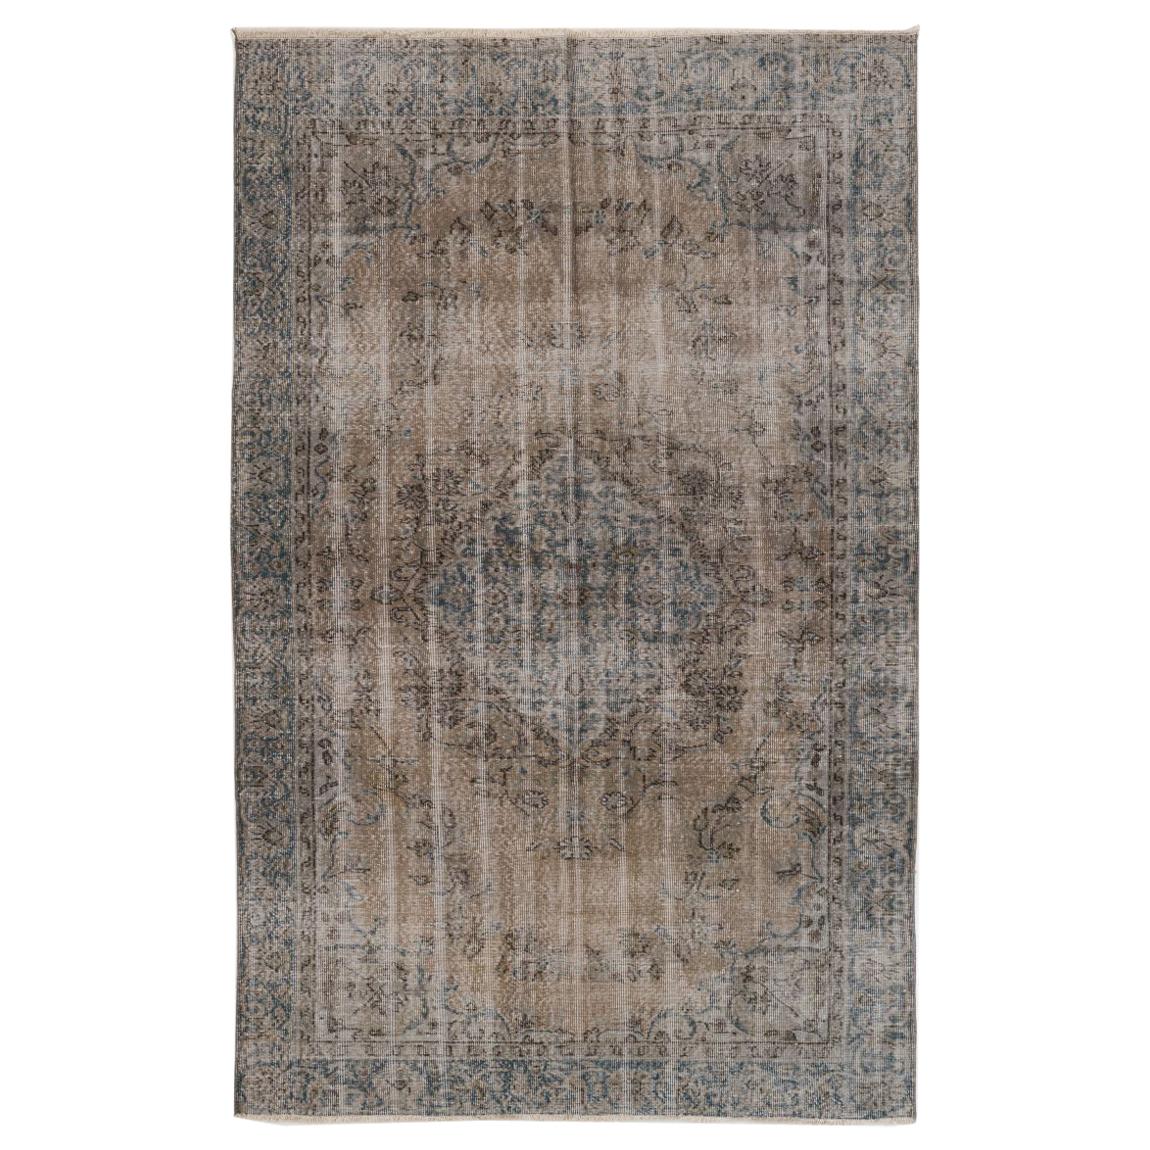 Hand-Knotted Vintage Central Anatolian Rug Overdyed in Gray for Modern Interiors